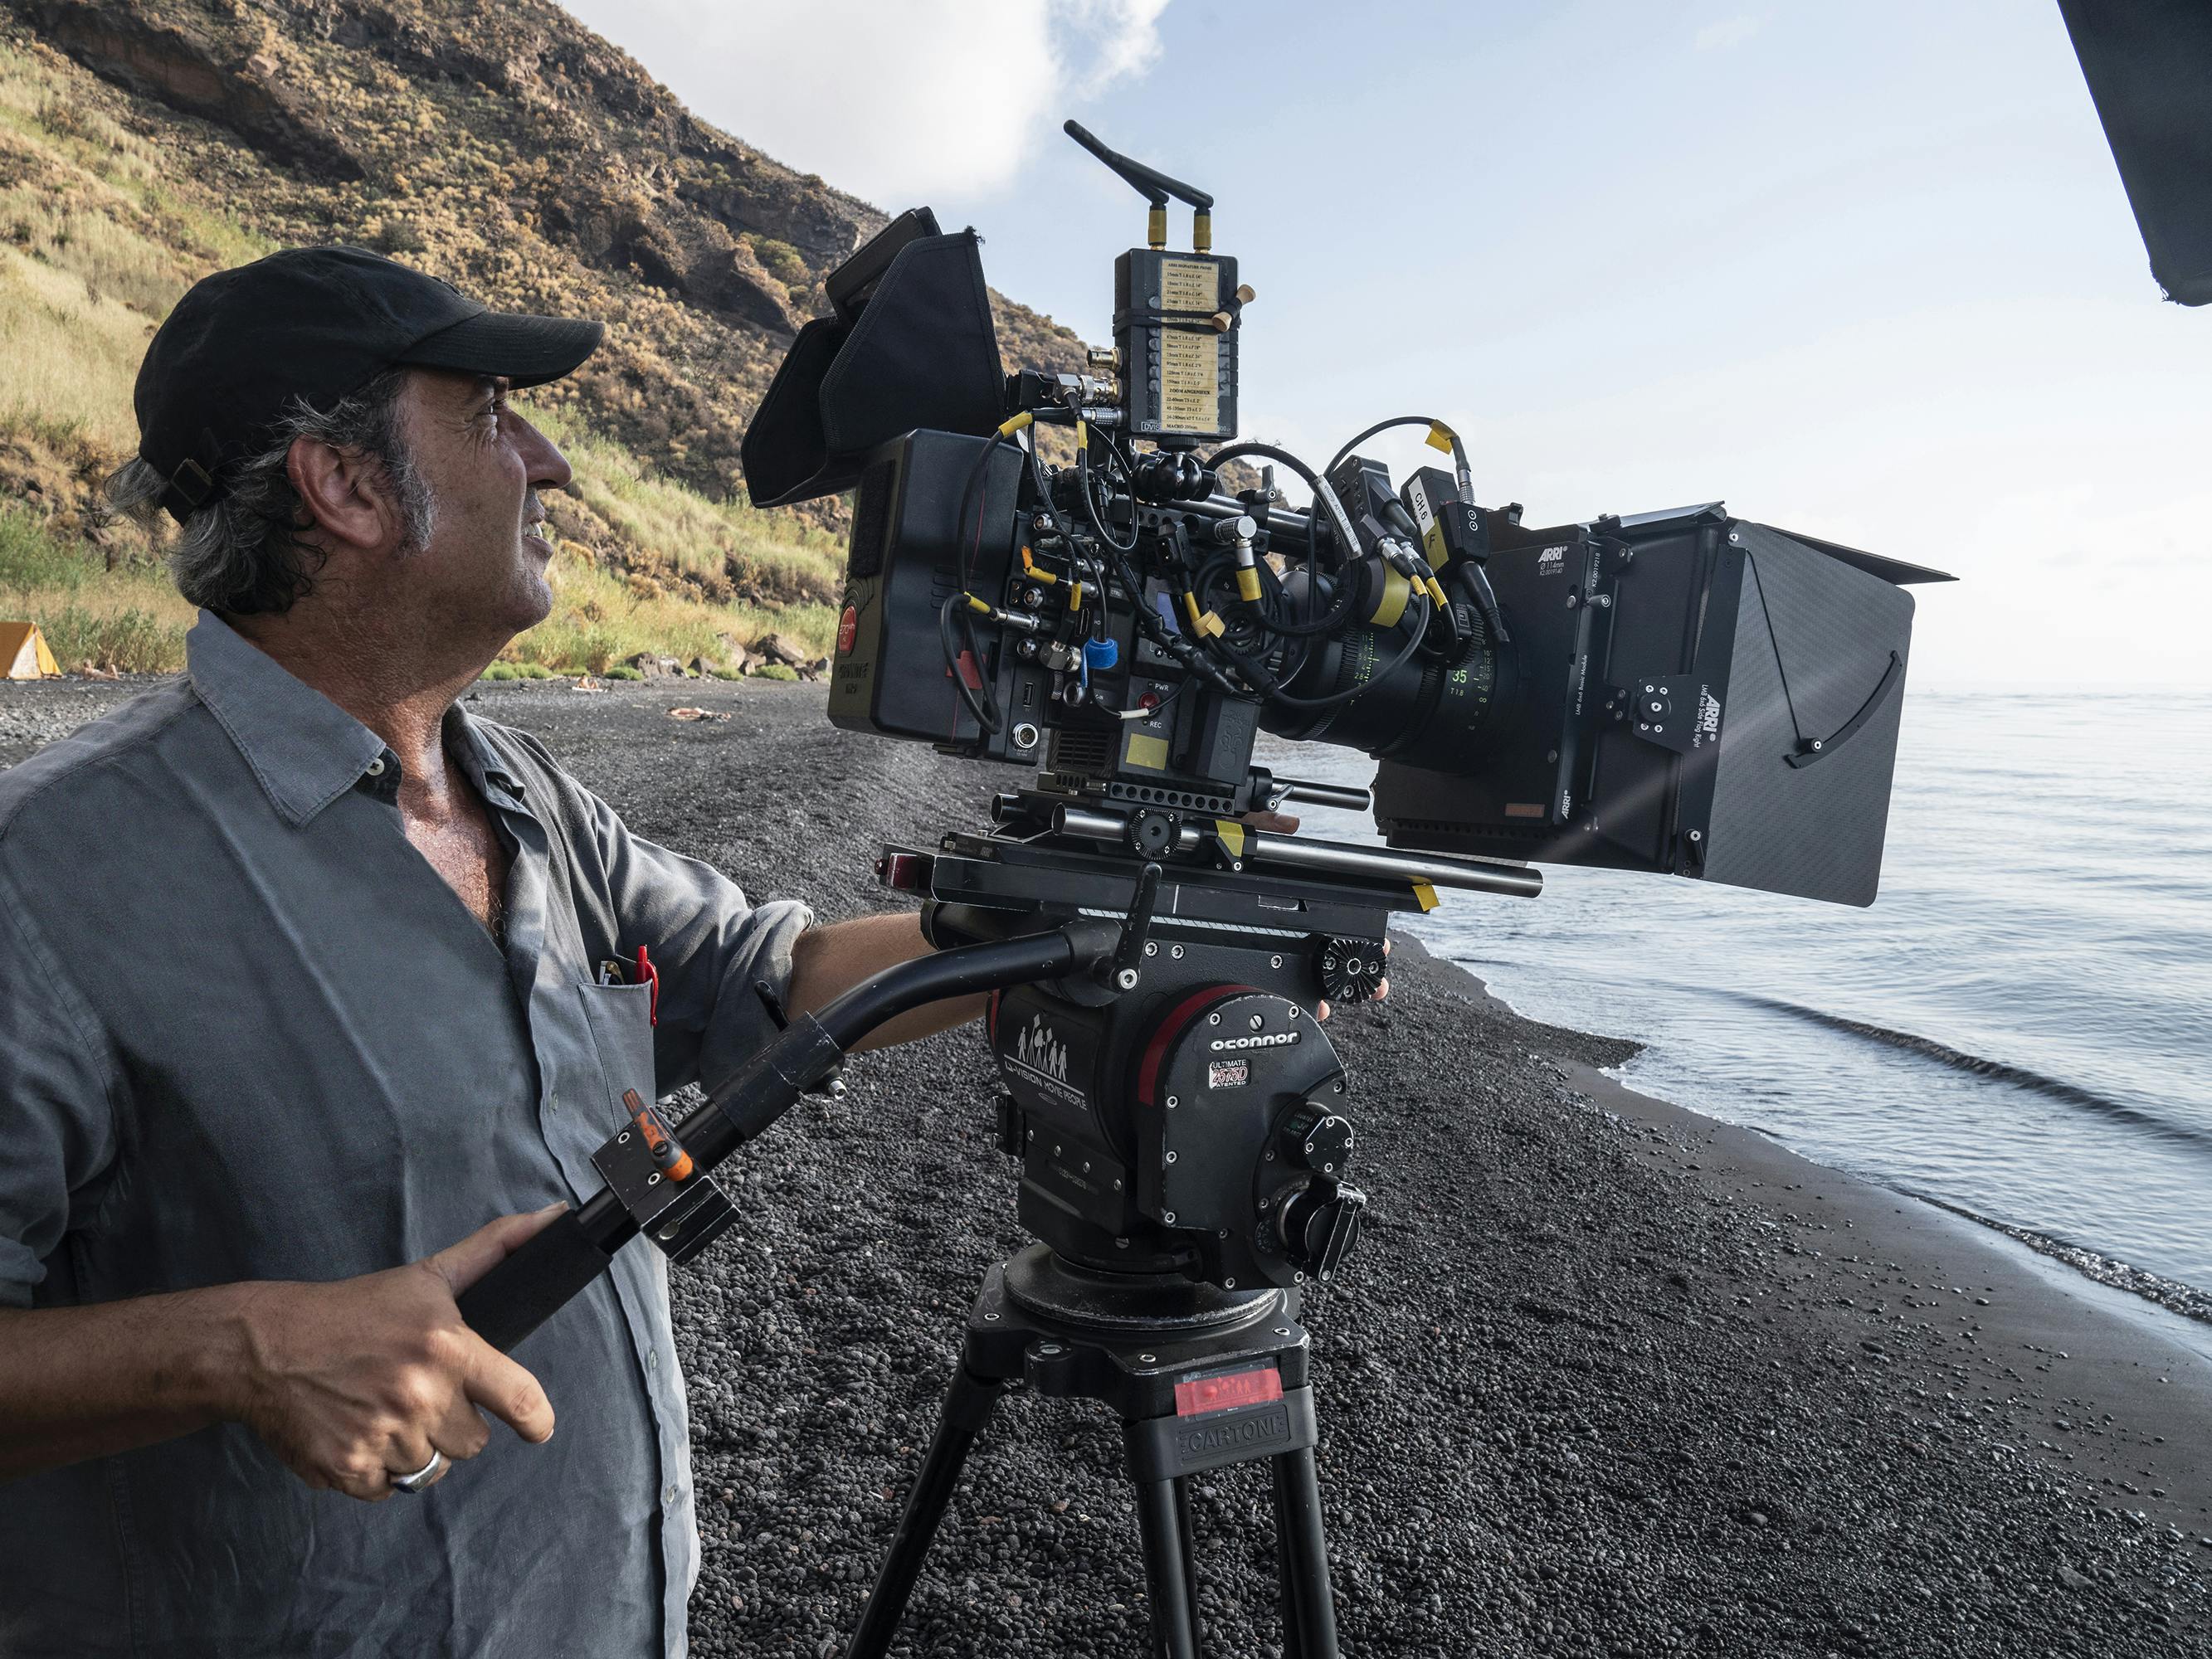 Paolo Sorrentino works a camera on a beach in a grey shirt and black hat.